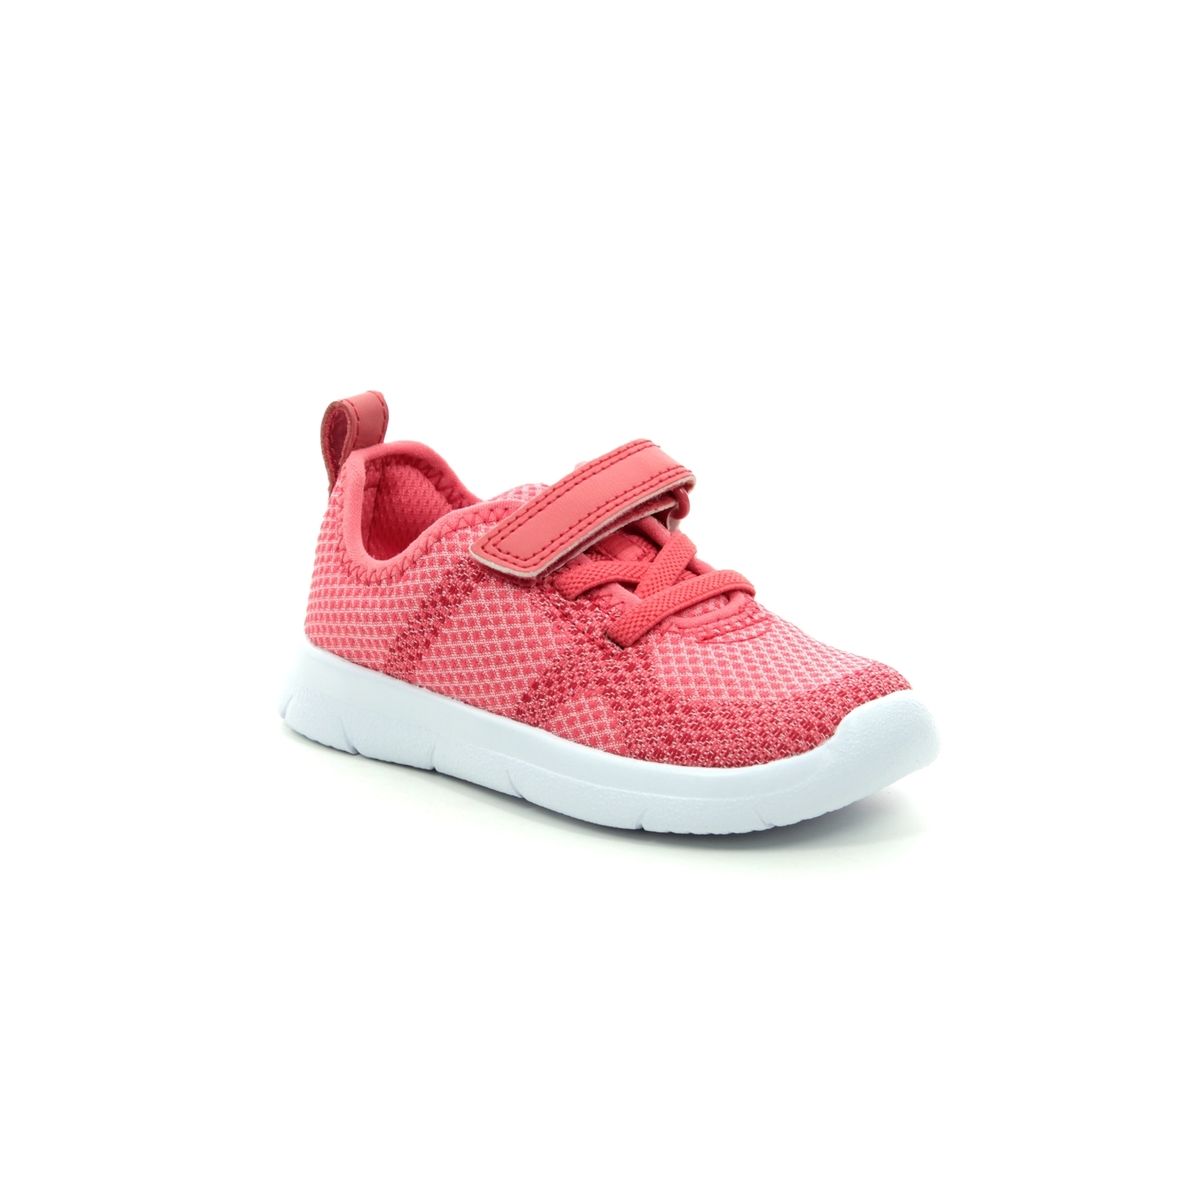 clarks infant trainers